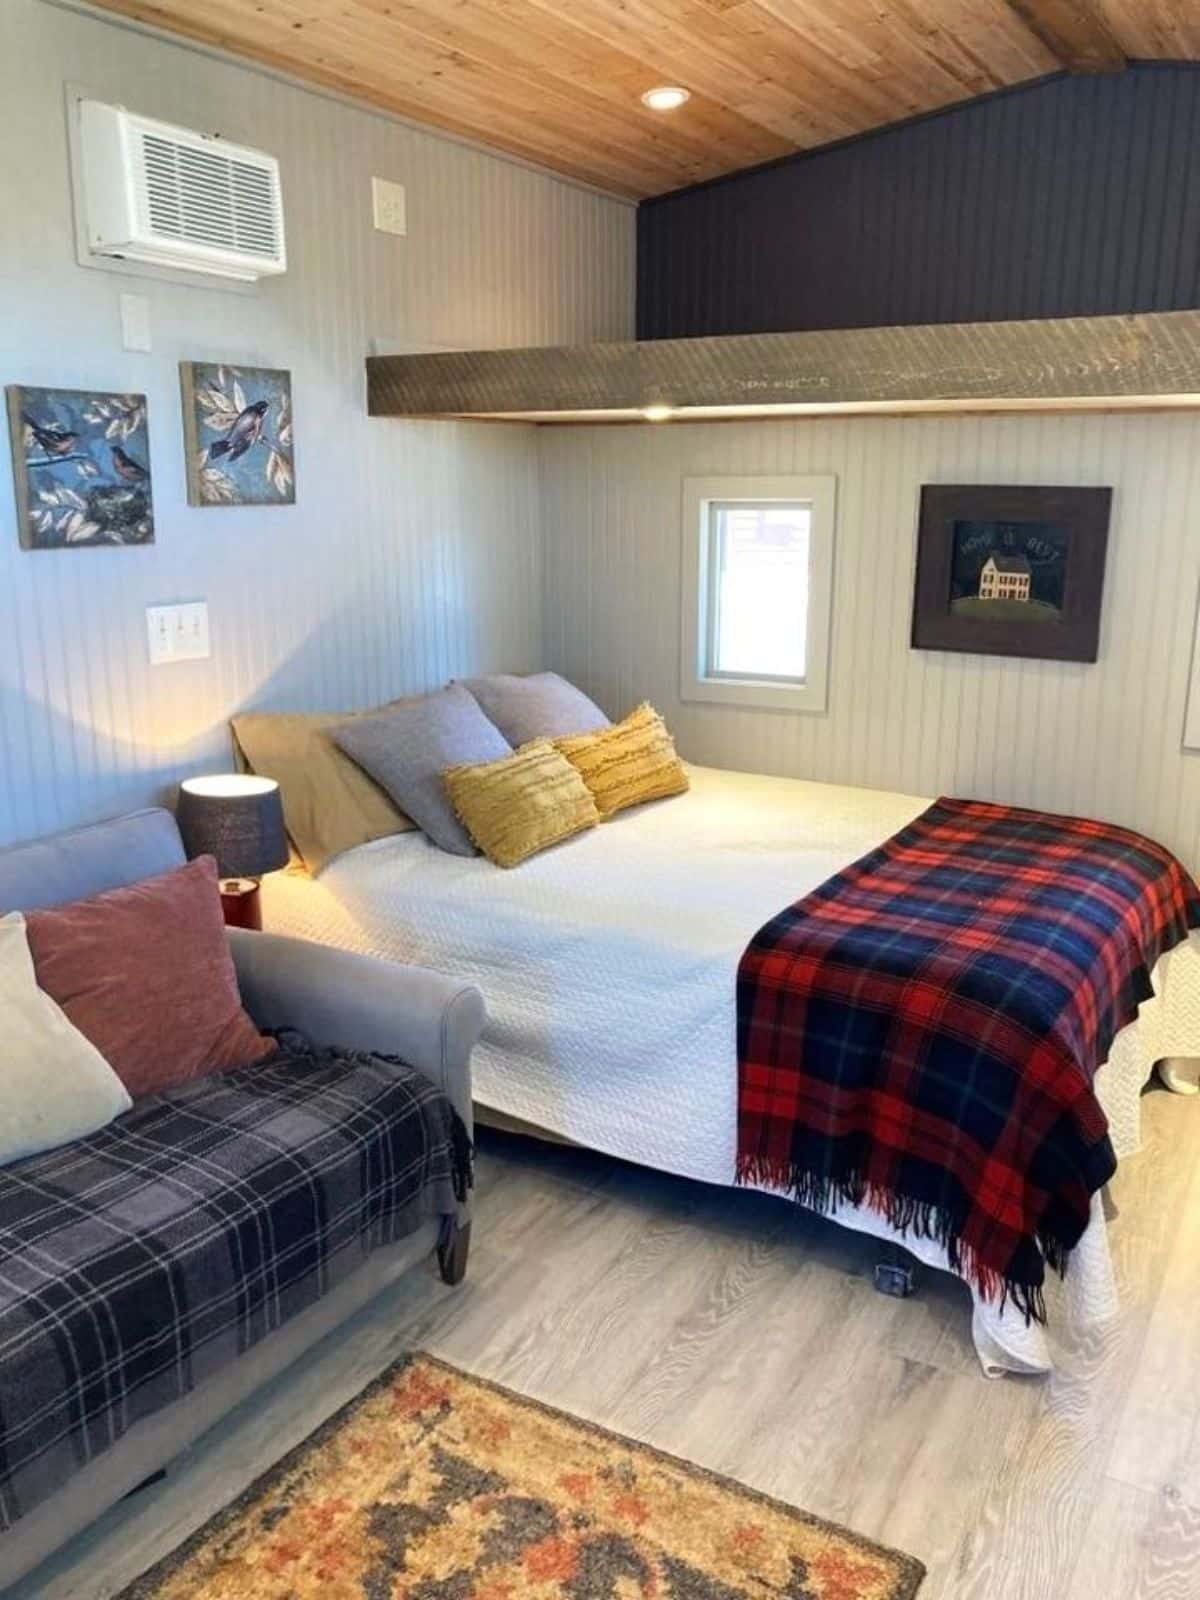 sleeping area of custom mobile home has a comfortable bed and a loft above it